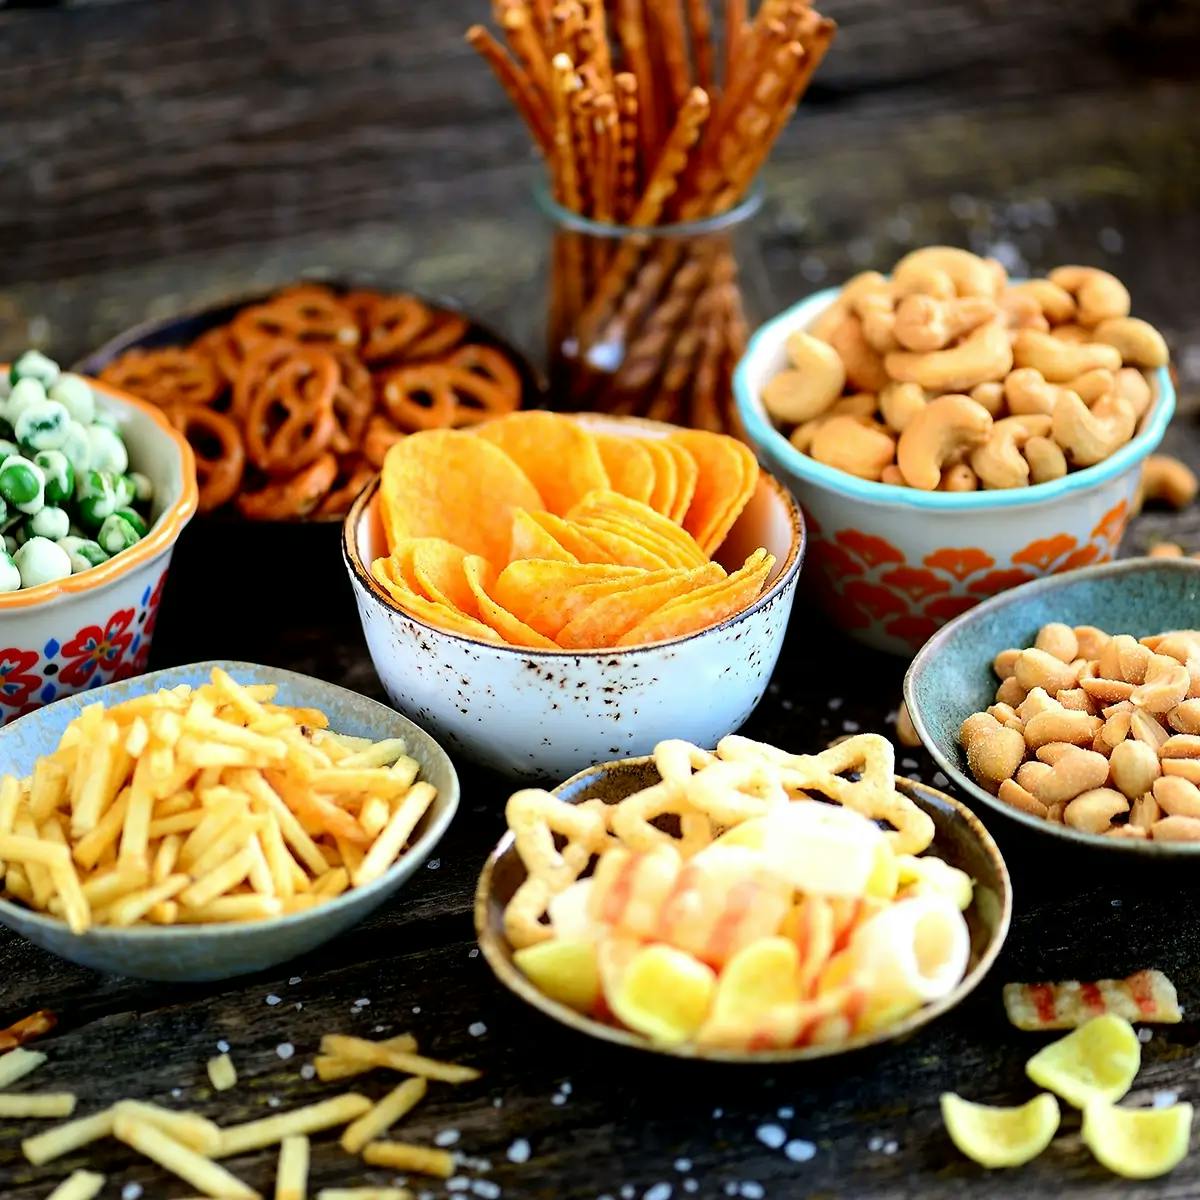 Bowls of Christmas snacks on a wooden table.